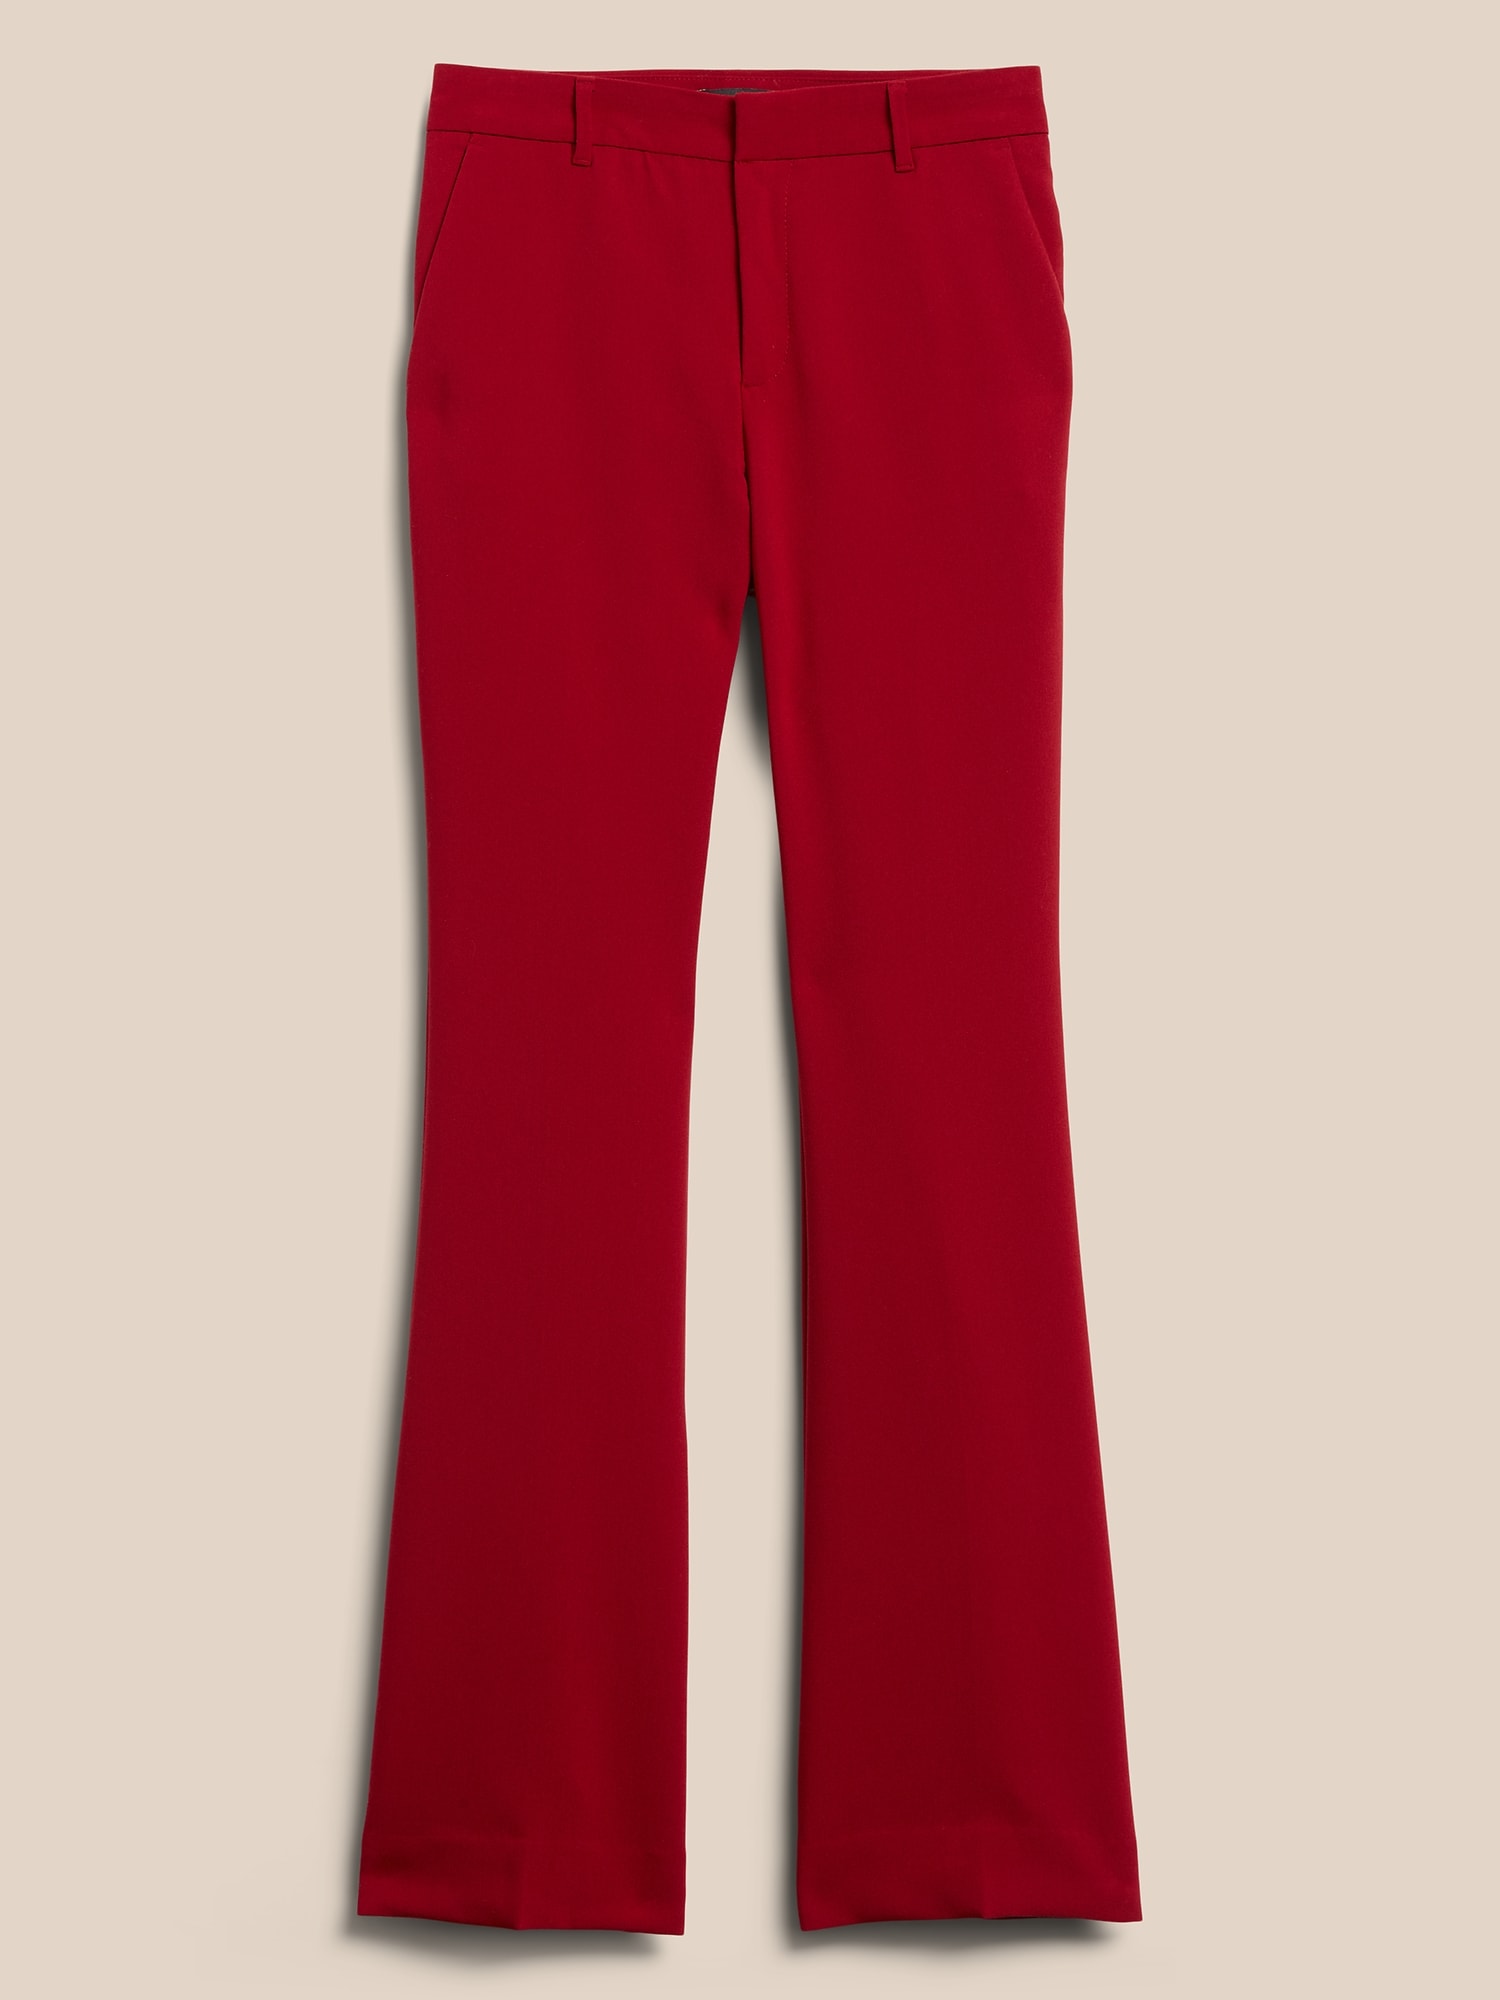 High-Rise Comfort Stretch Bootcut Pant